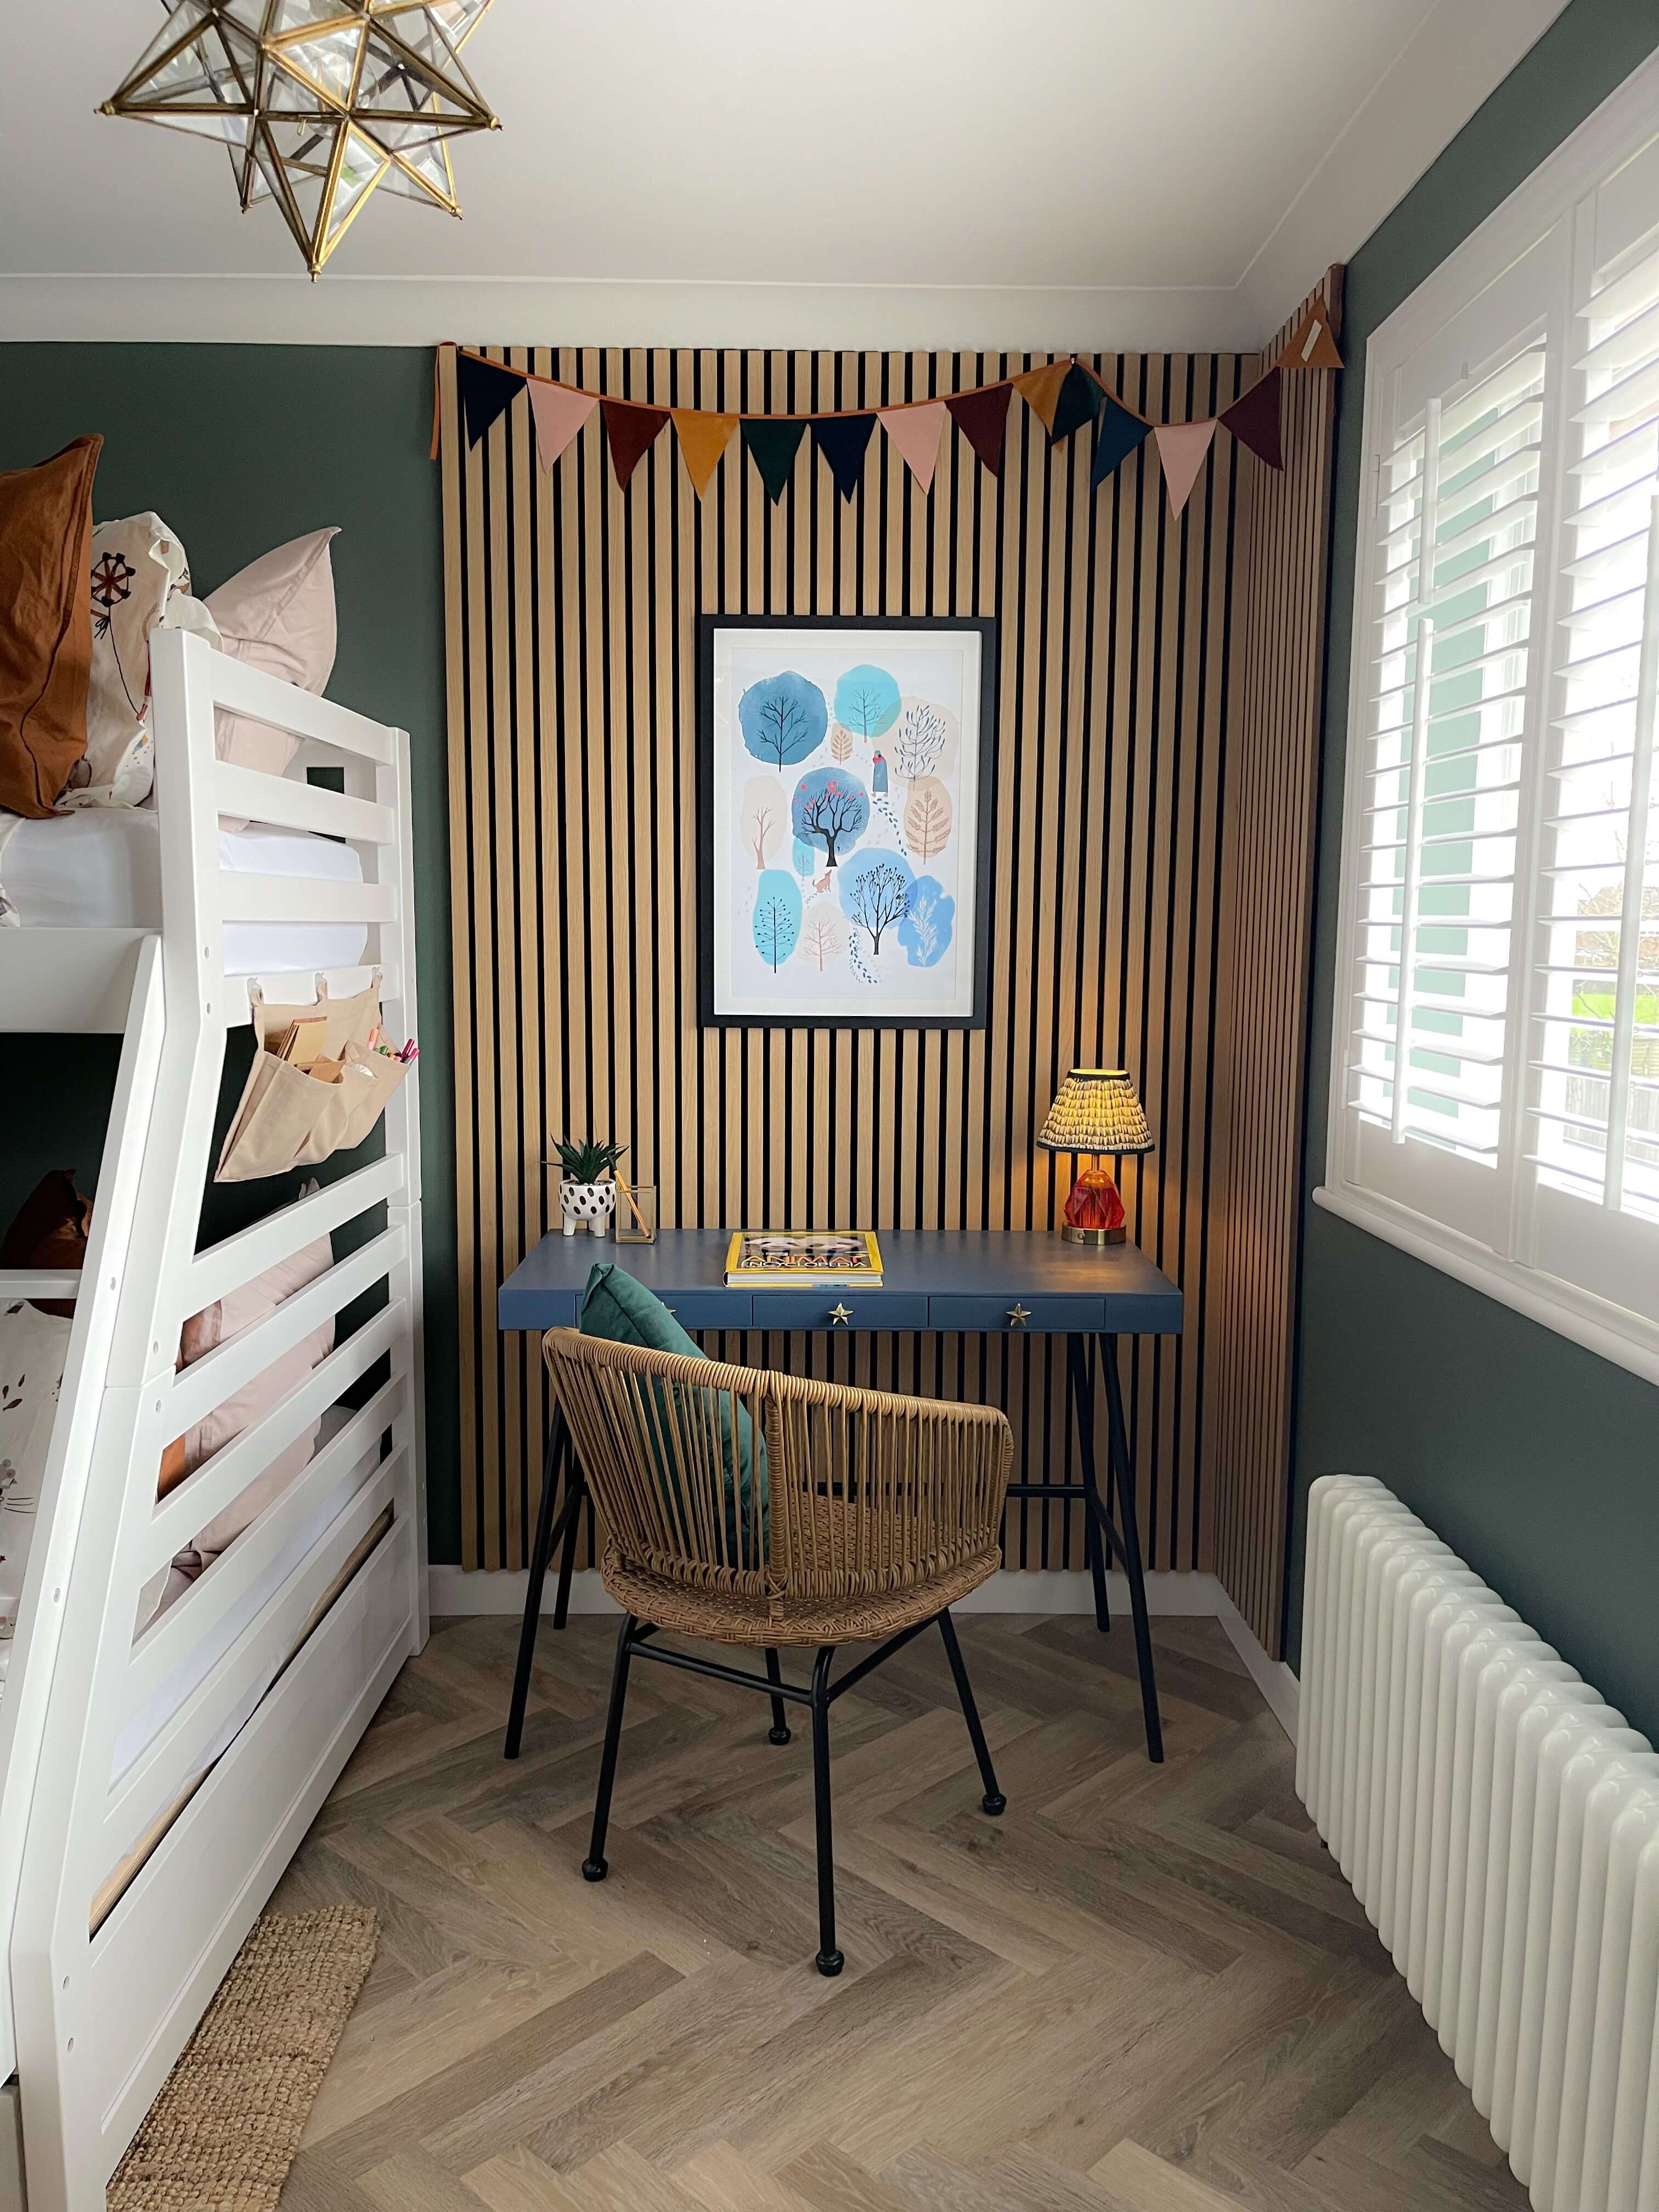 Q&A With Helen From @happinessis_interiors